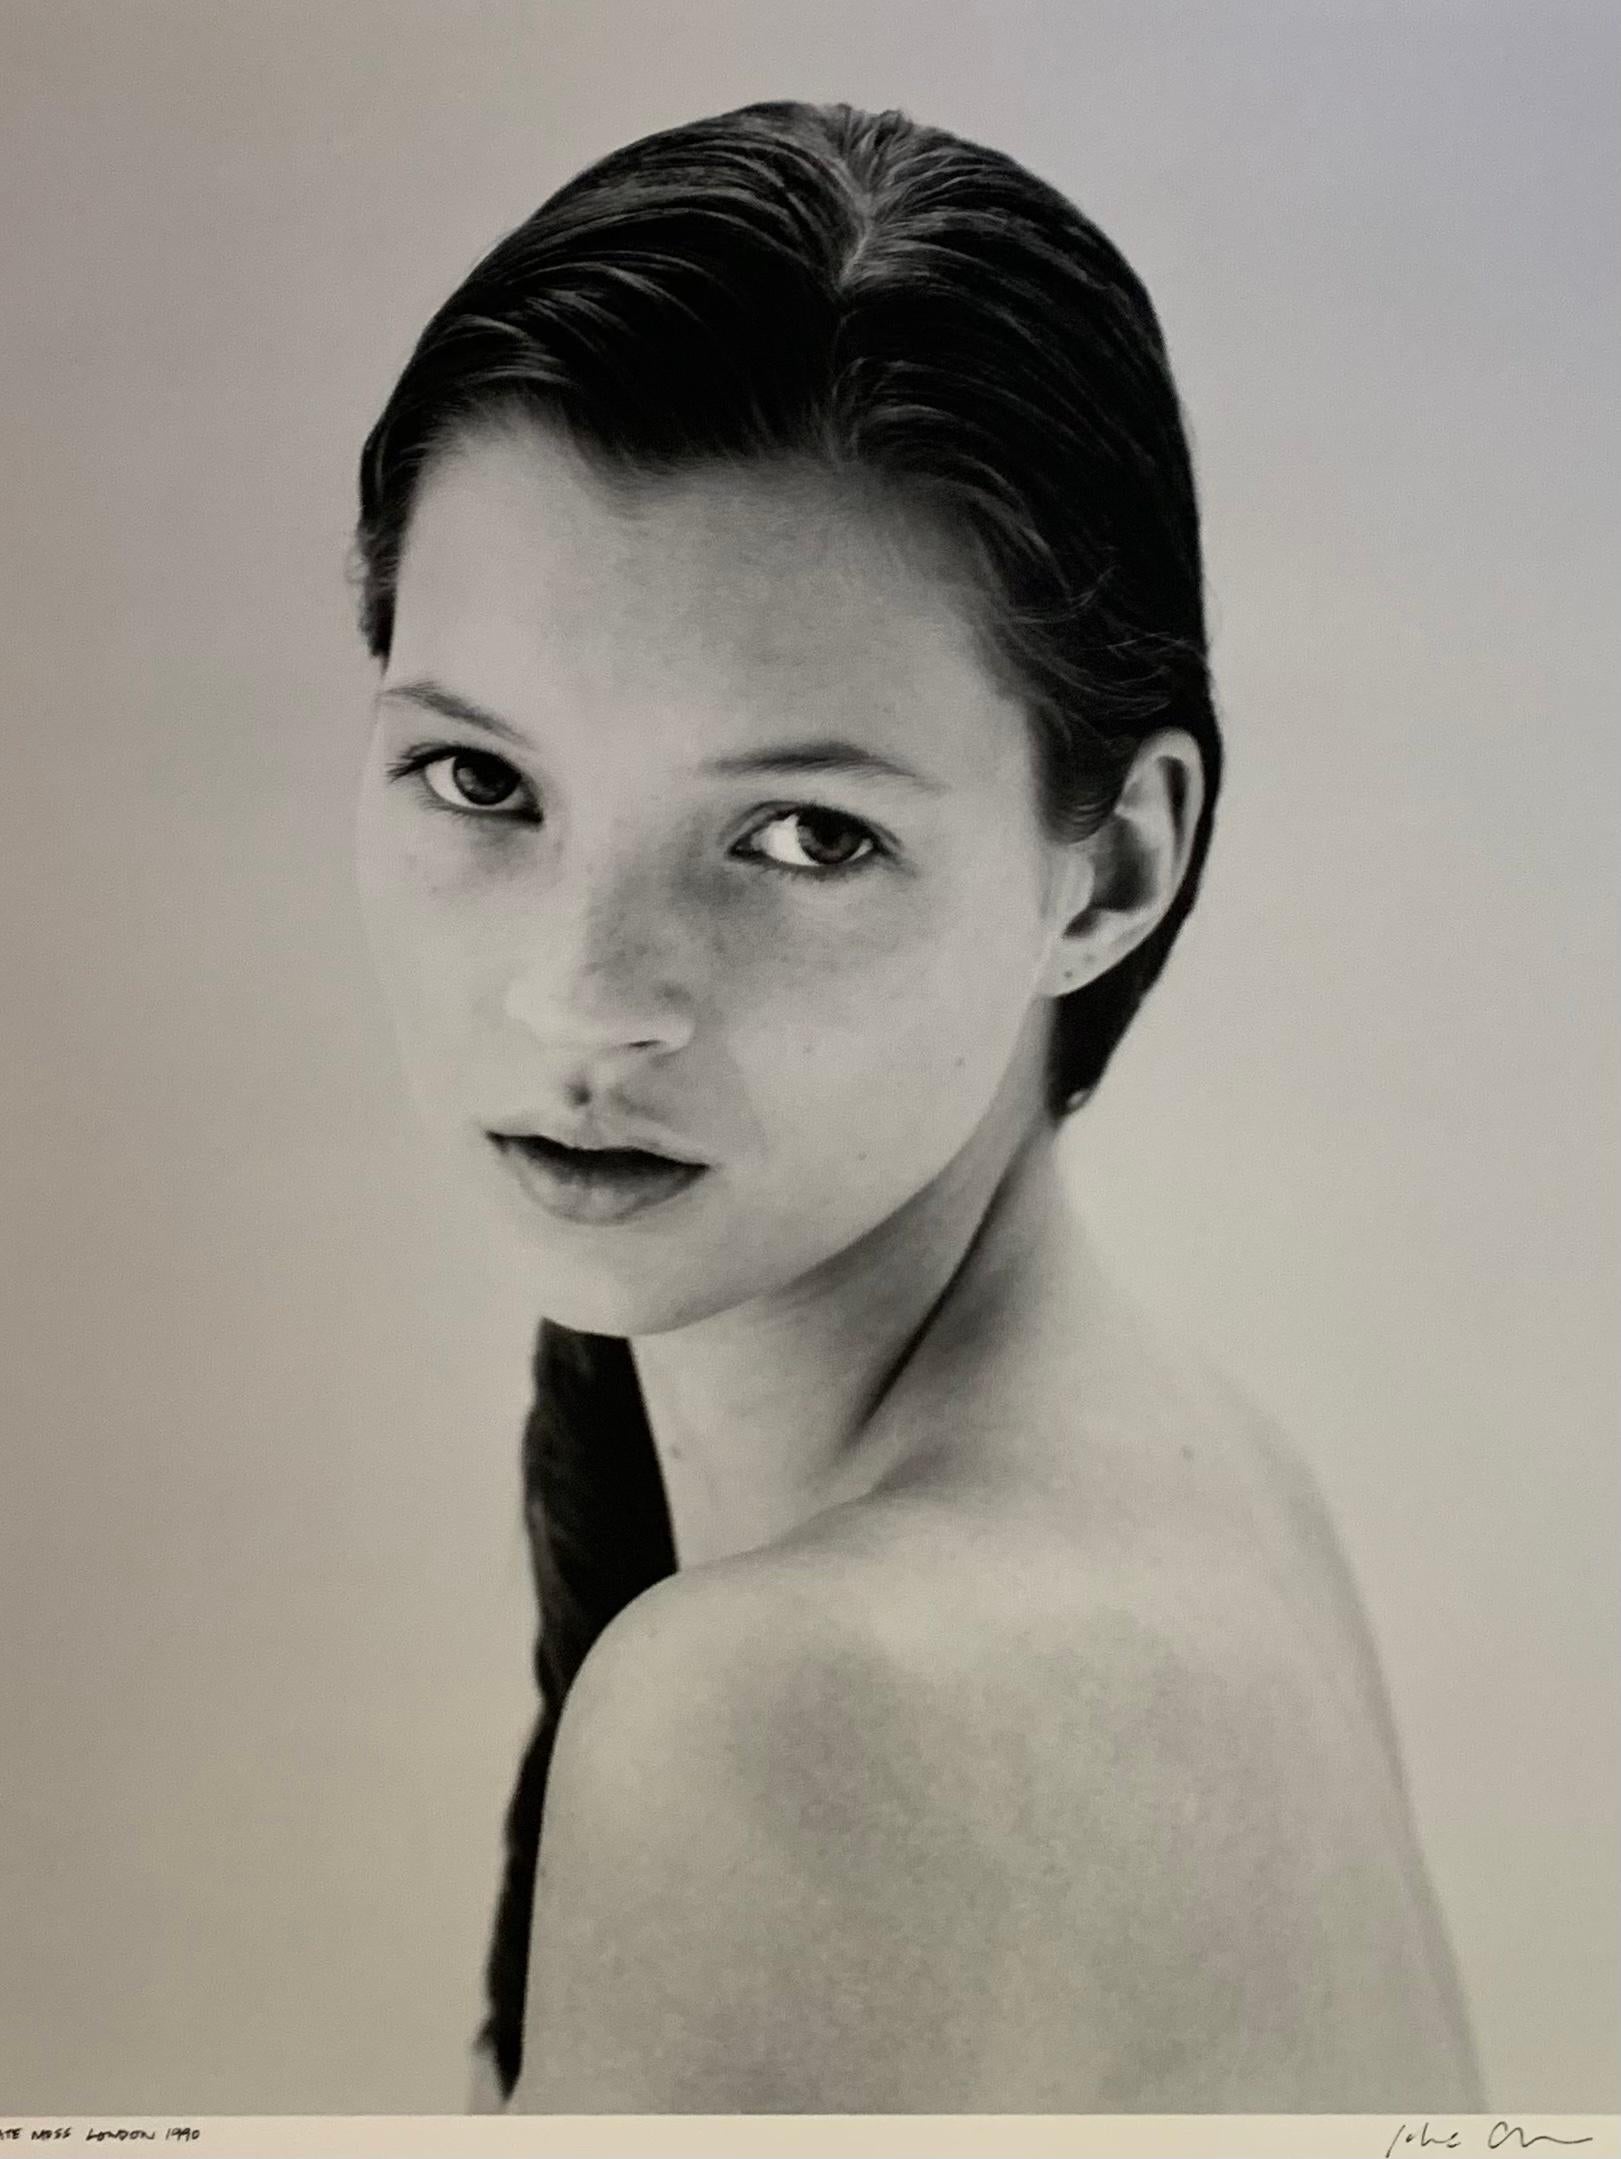 Jake Chessum Portrait Photograph - "Kate Moss London" Signed Limited Edition Framed Archival Pigment Print 